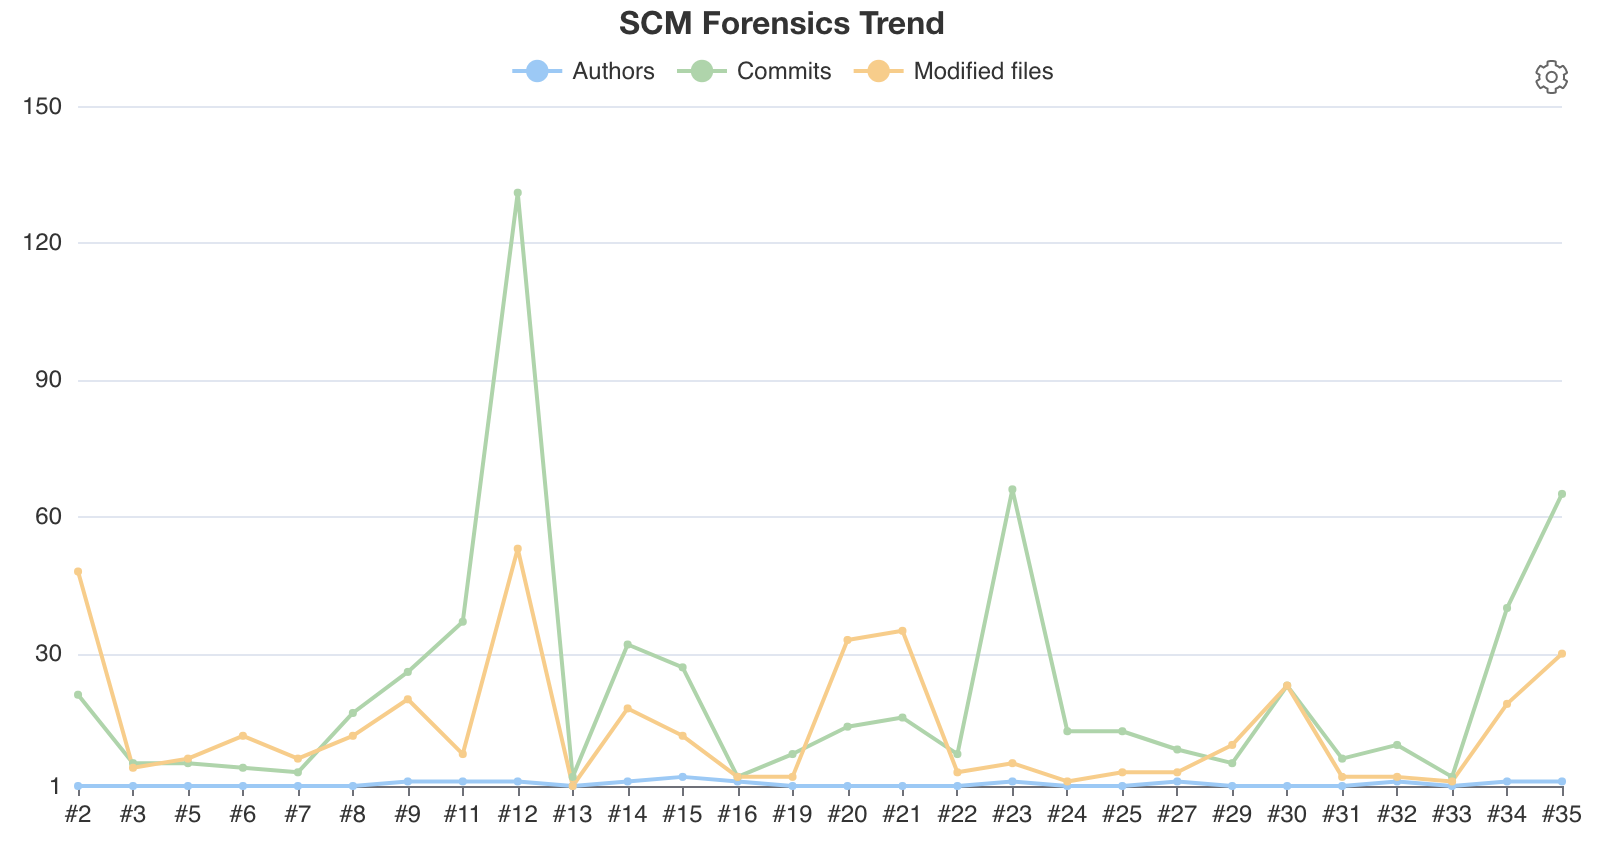 Author, commit, and modified files count trend chart